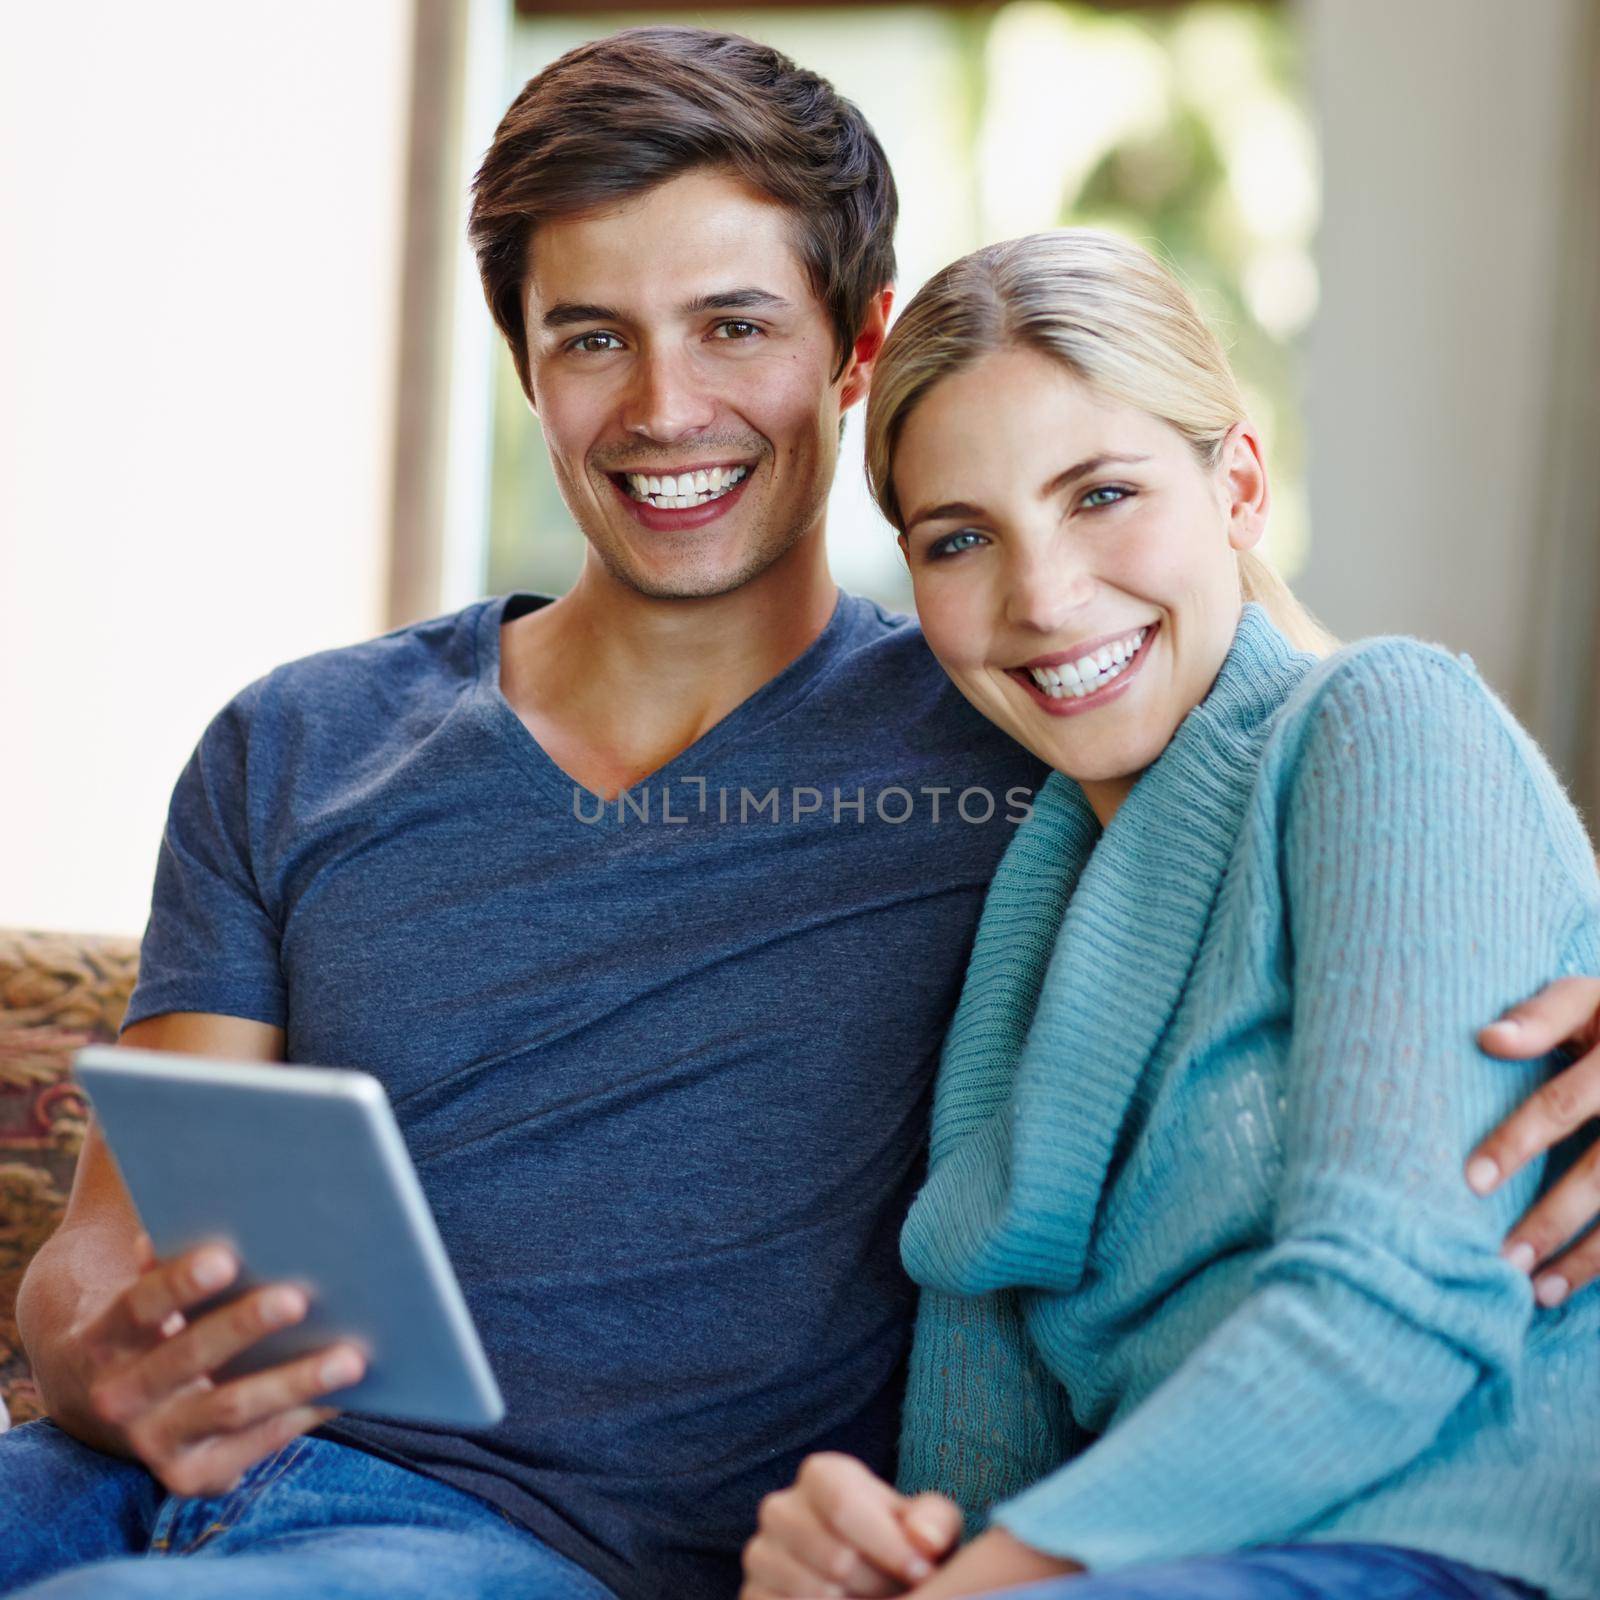 Wireless bliss. a happy young couple using a digital tablet together on the sofa at home